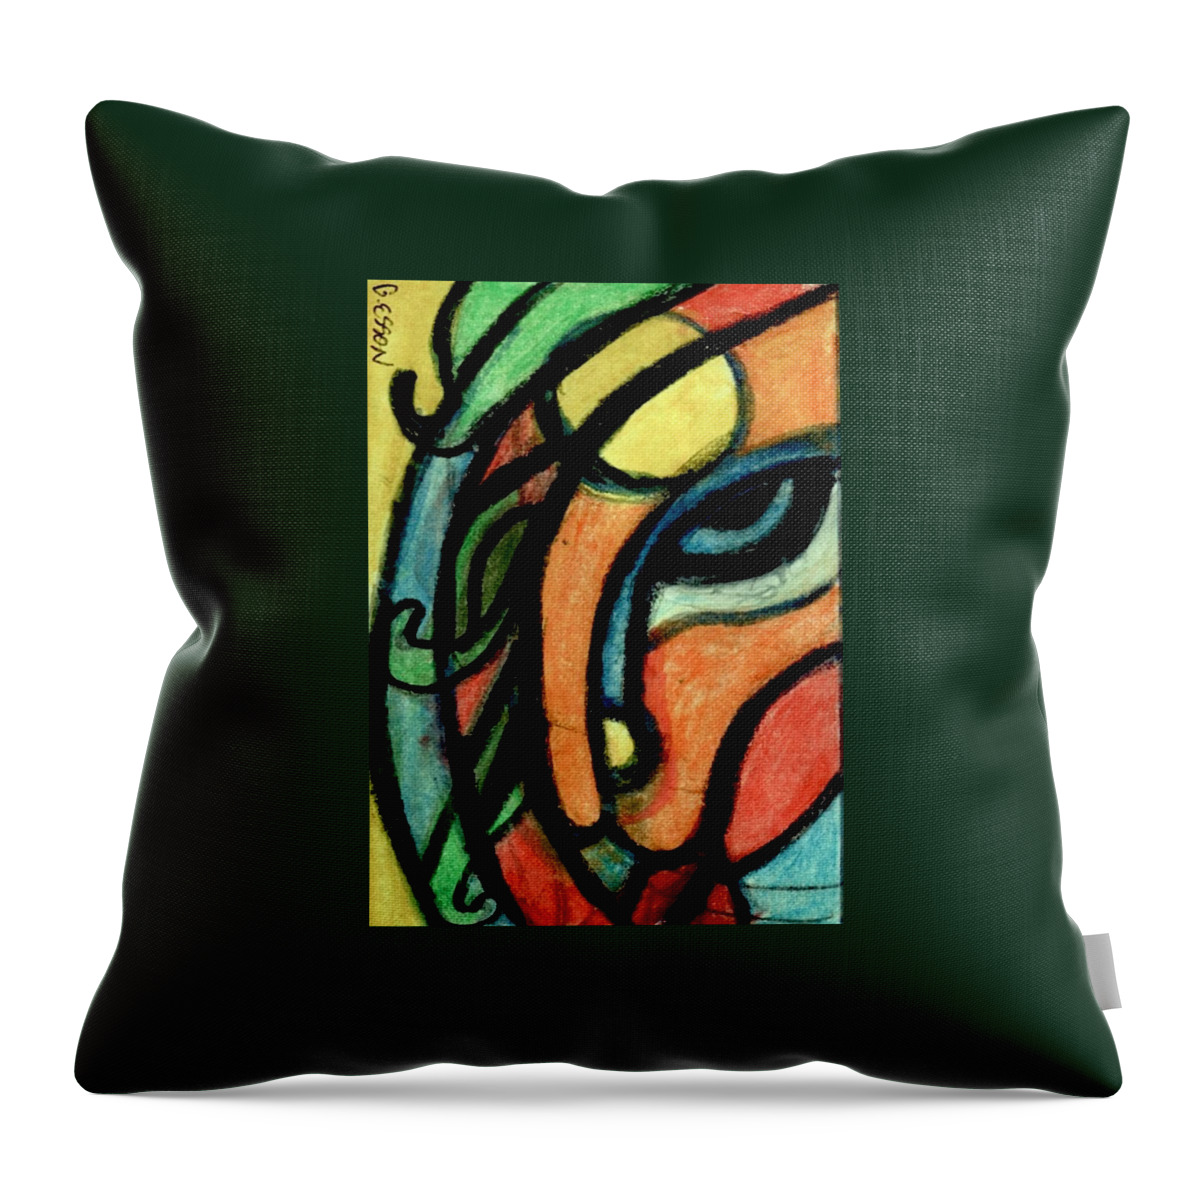 Face Throw Pillow featuring the painting Behold The Dragon Moon by Genevieve Esson